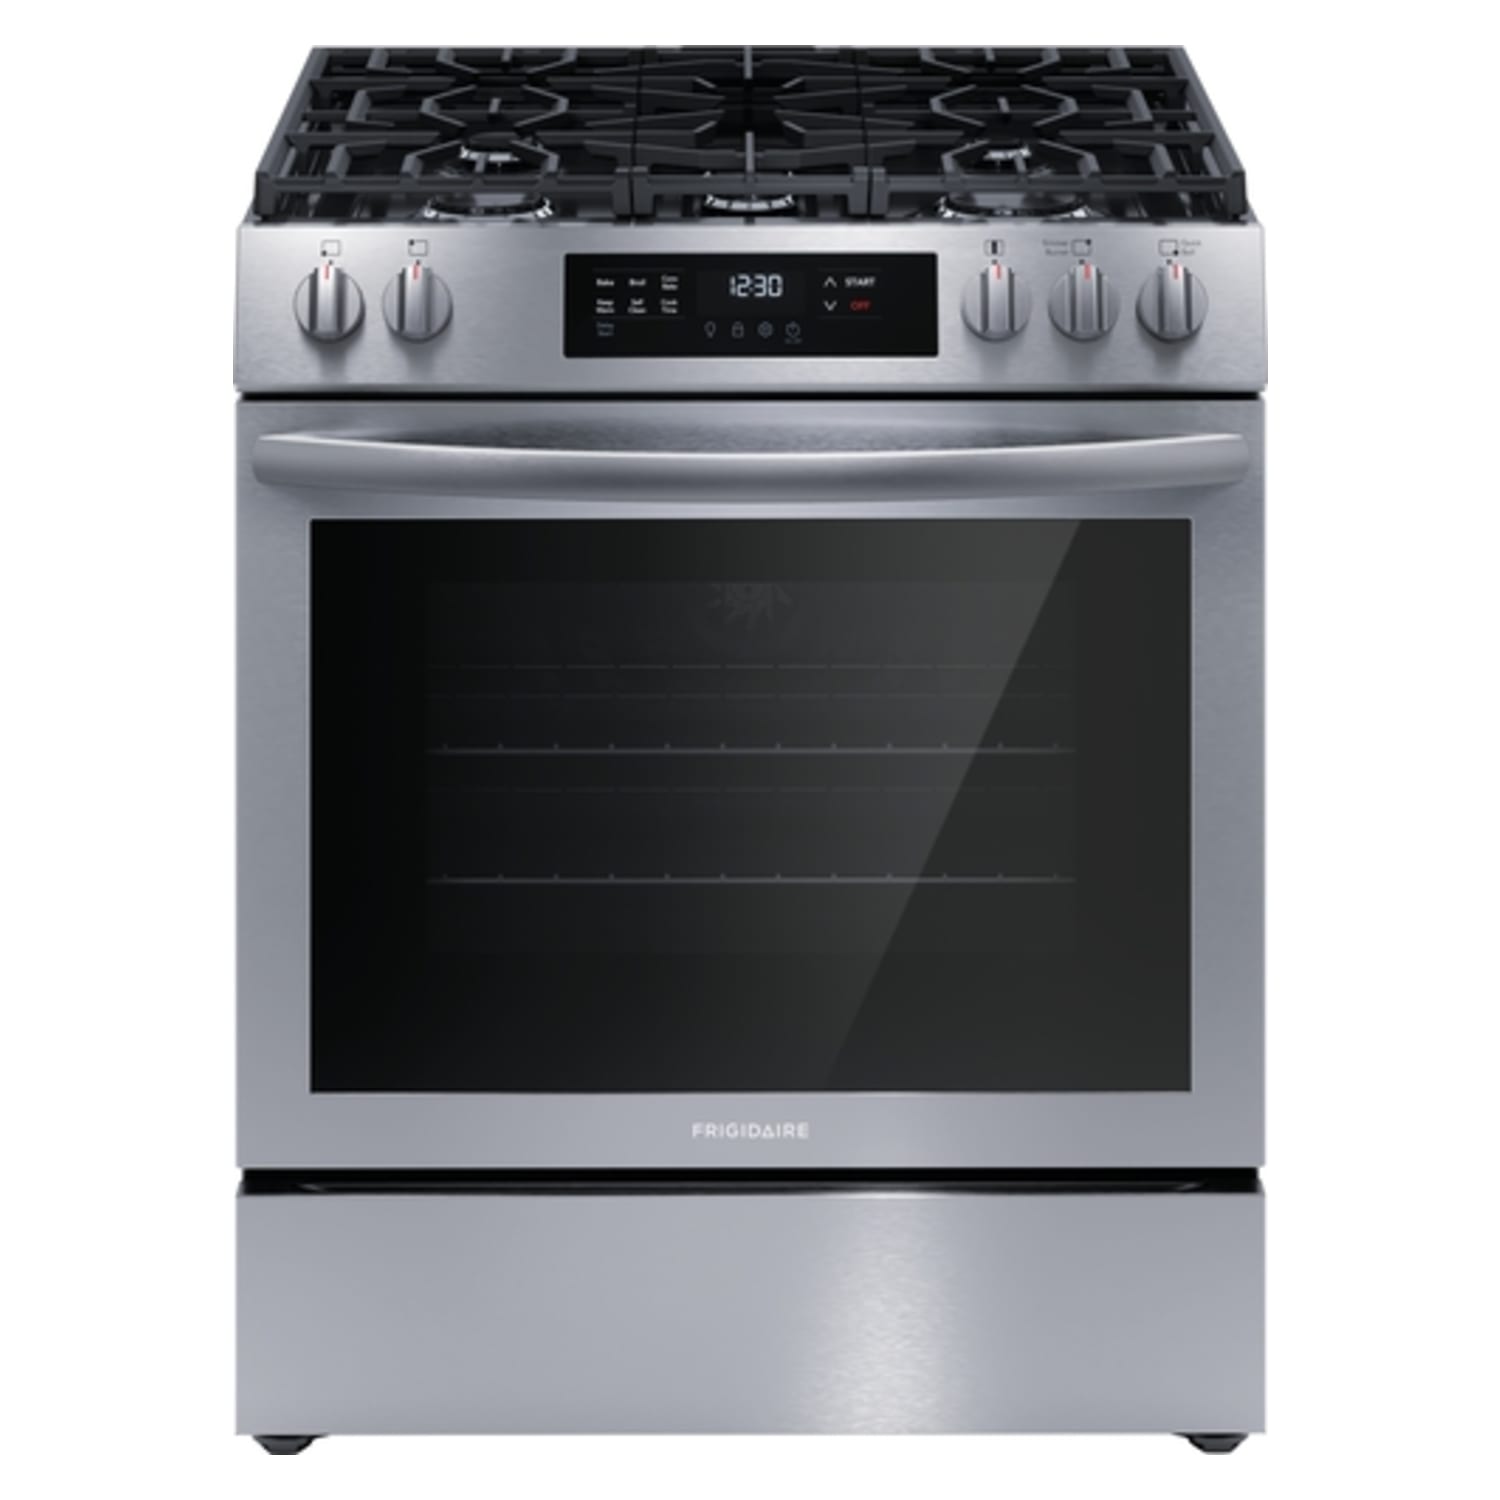 Frigidaire 30” Front Control Gas Range with Convection Bake - FCFG3083AS